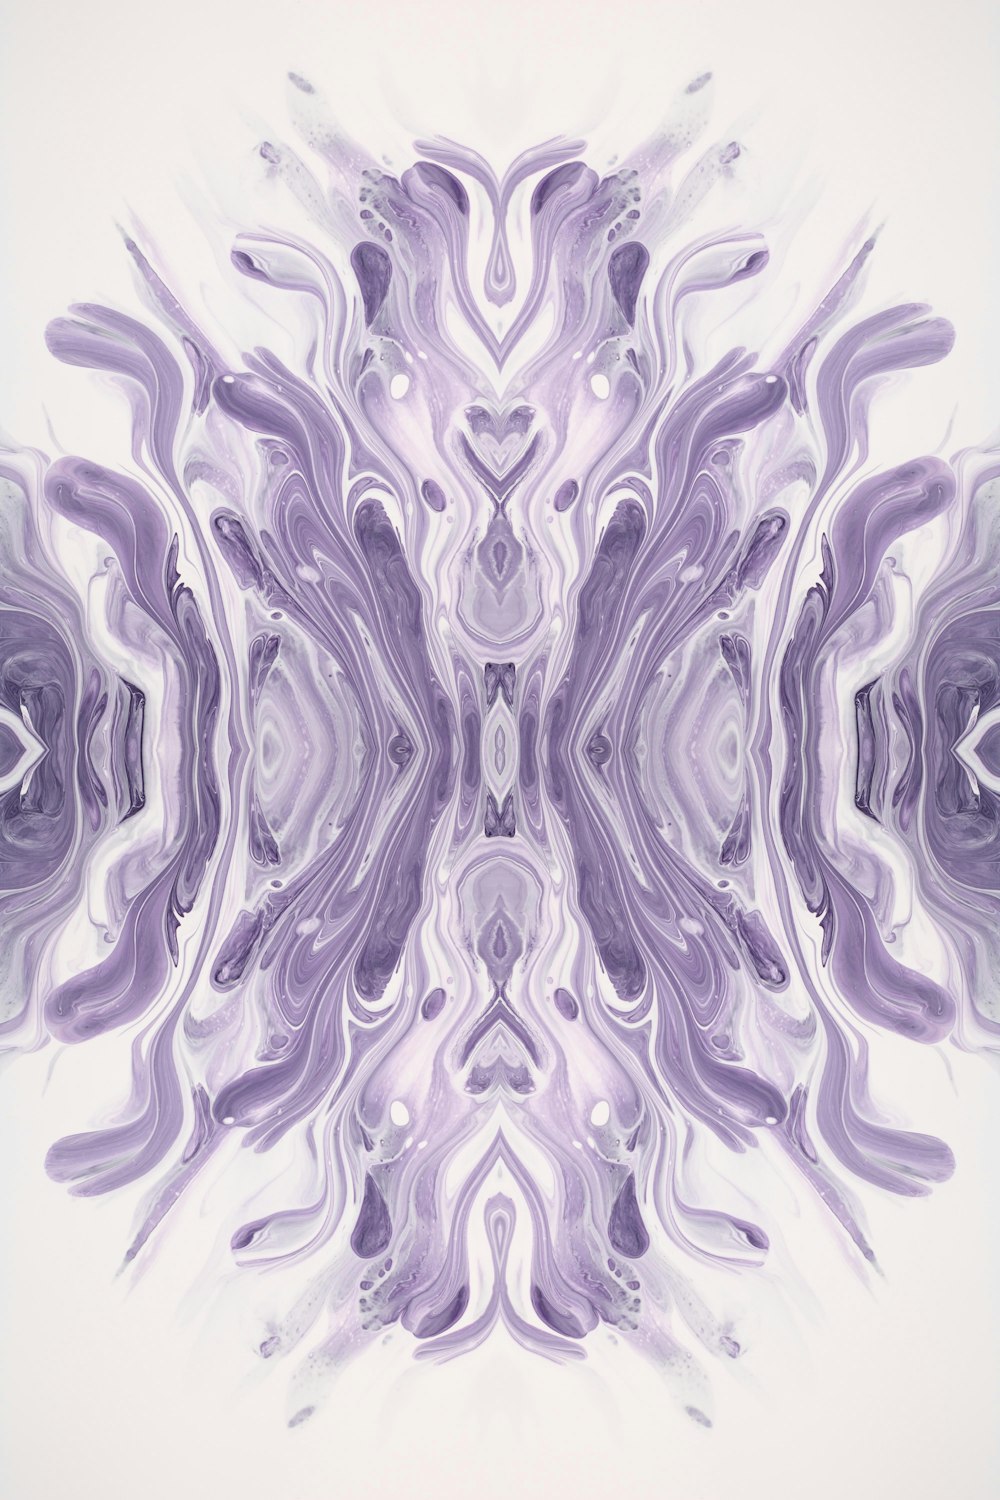 an abstract image of purple and white shapes